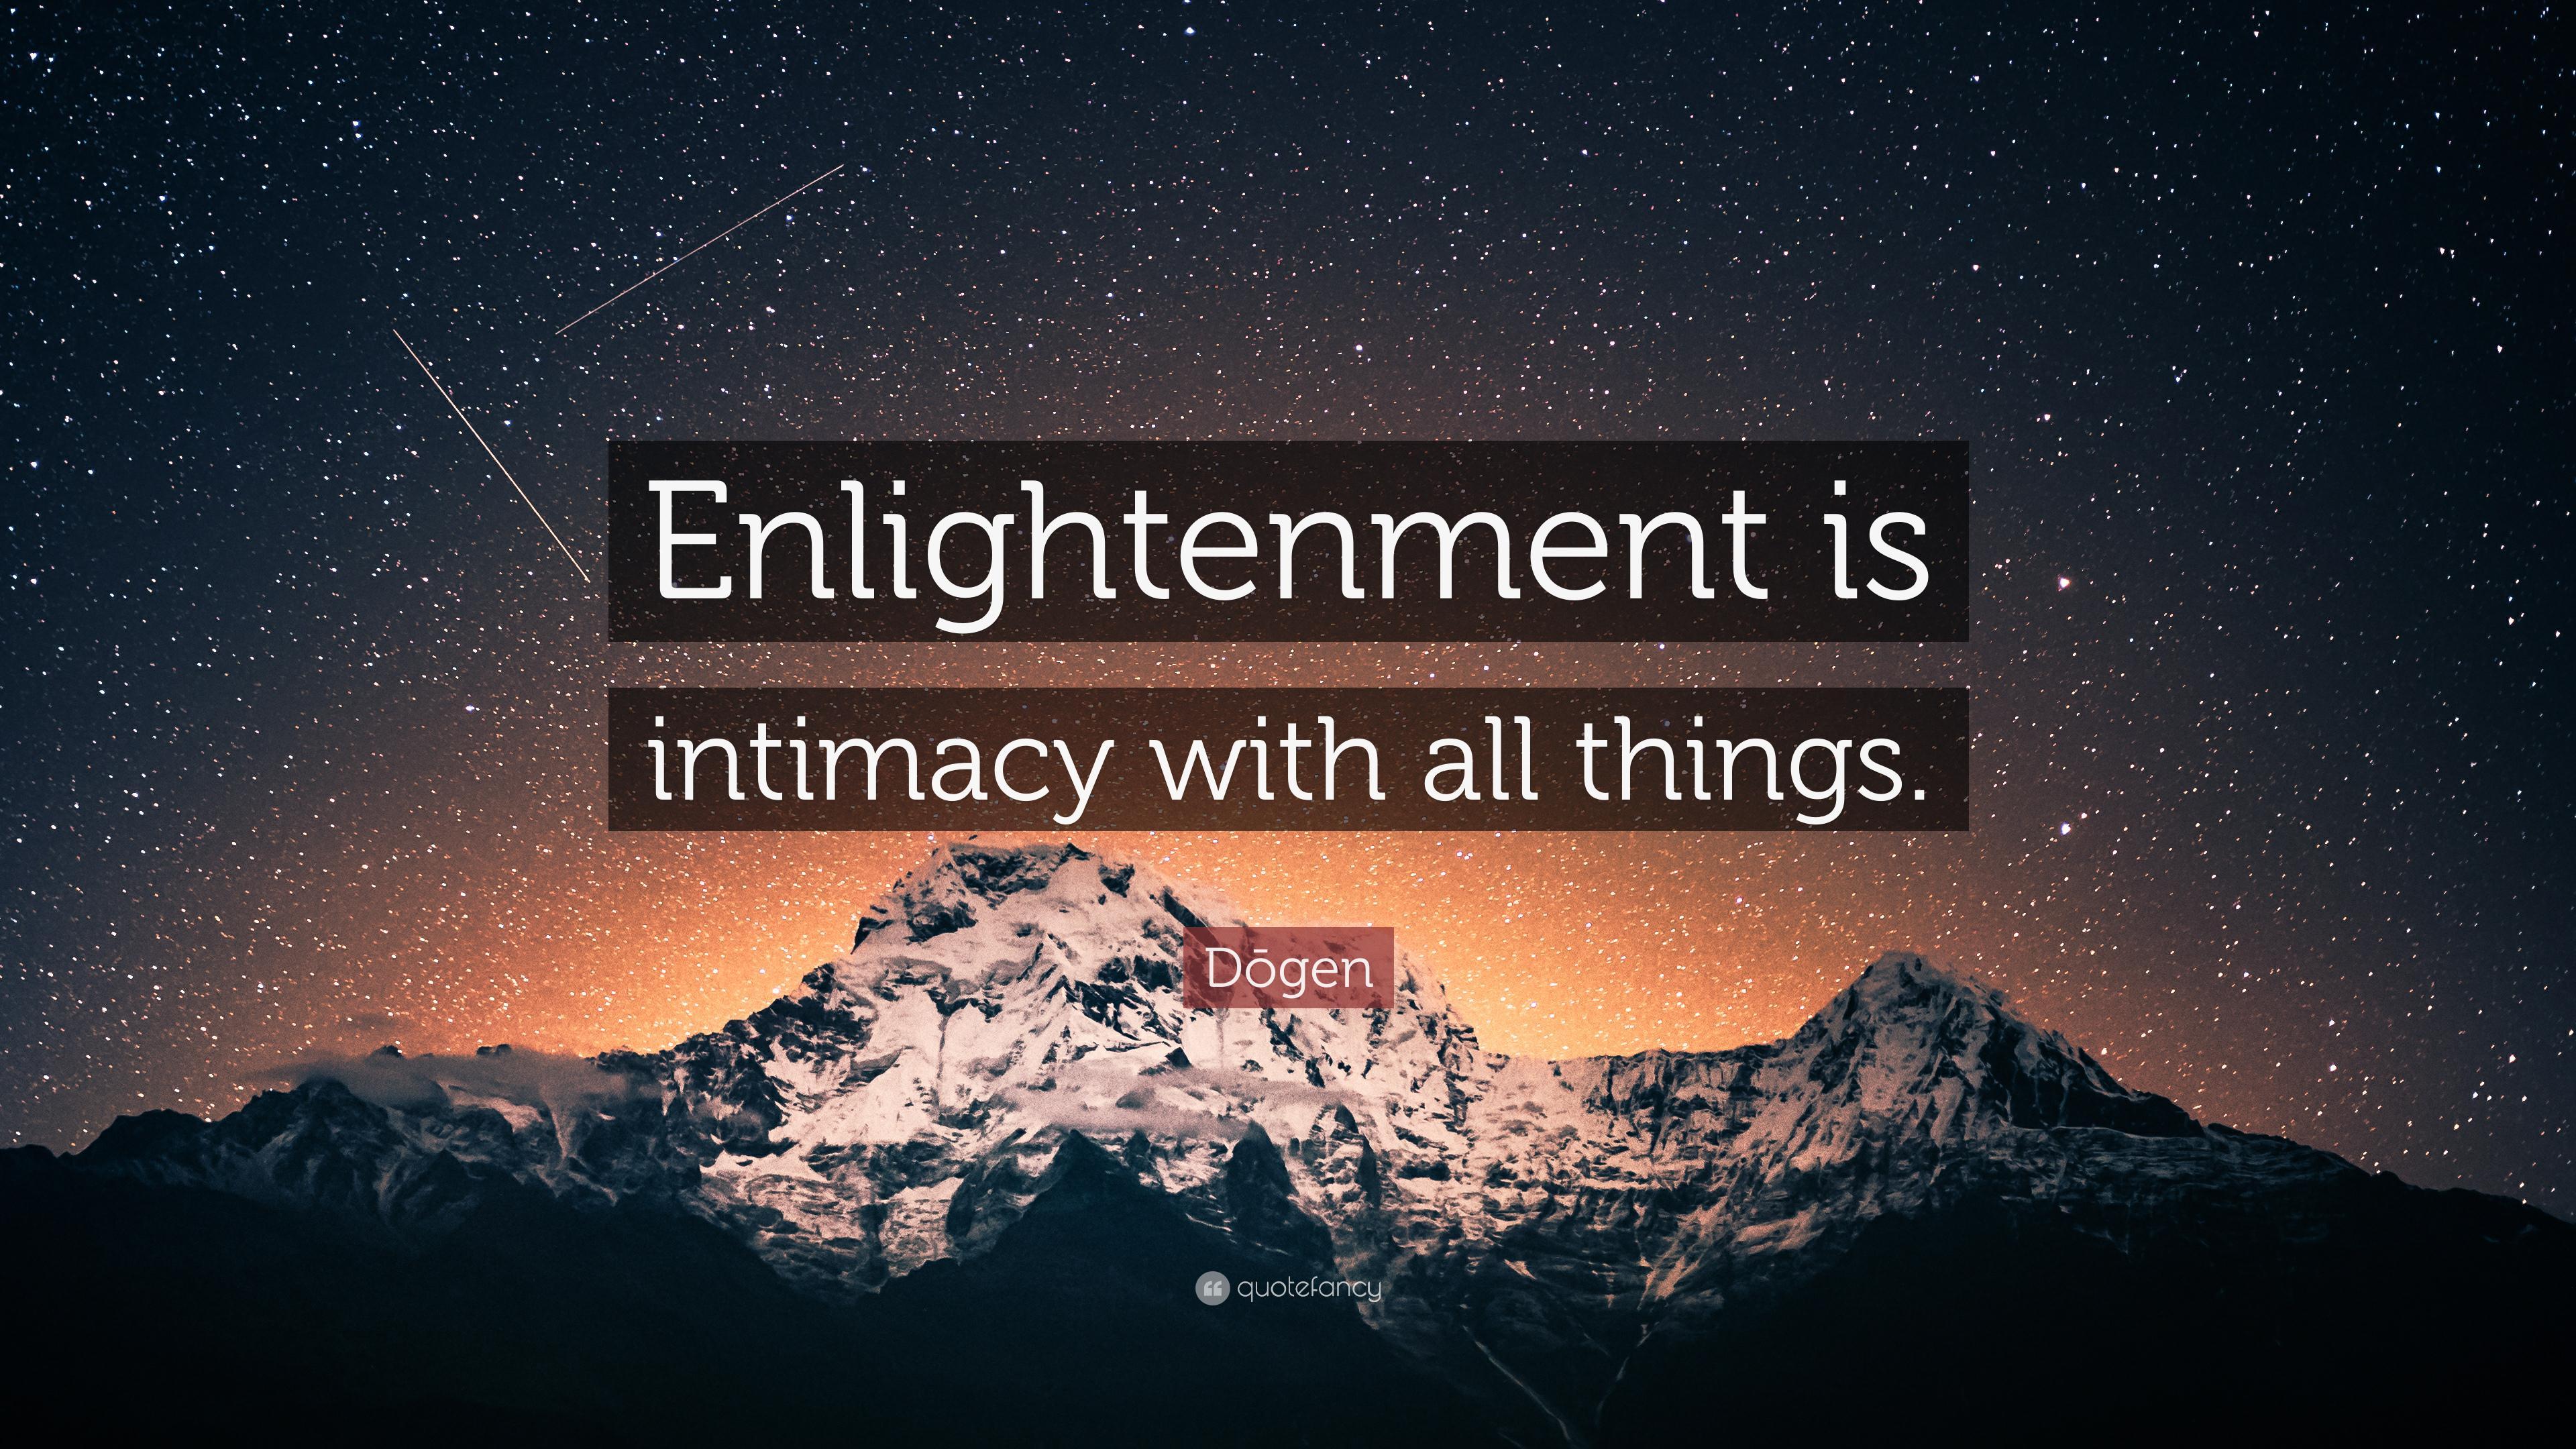 Dōgen Quote: “Enlightenment is intimacy with all things.” 7